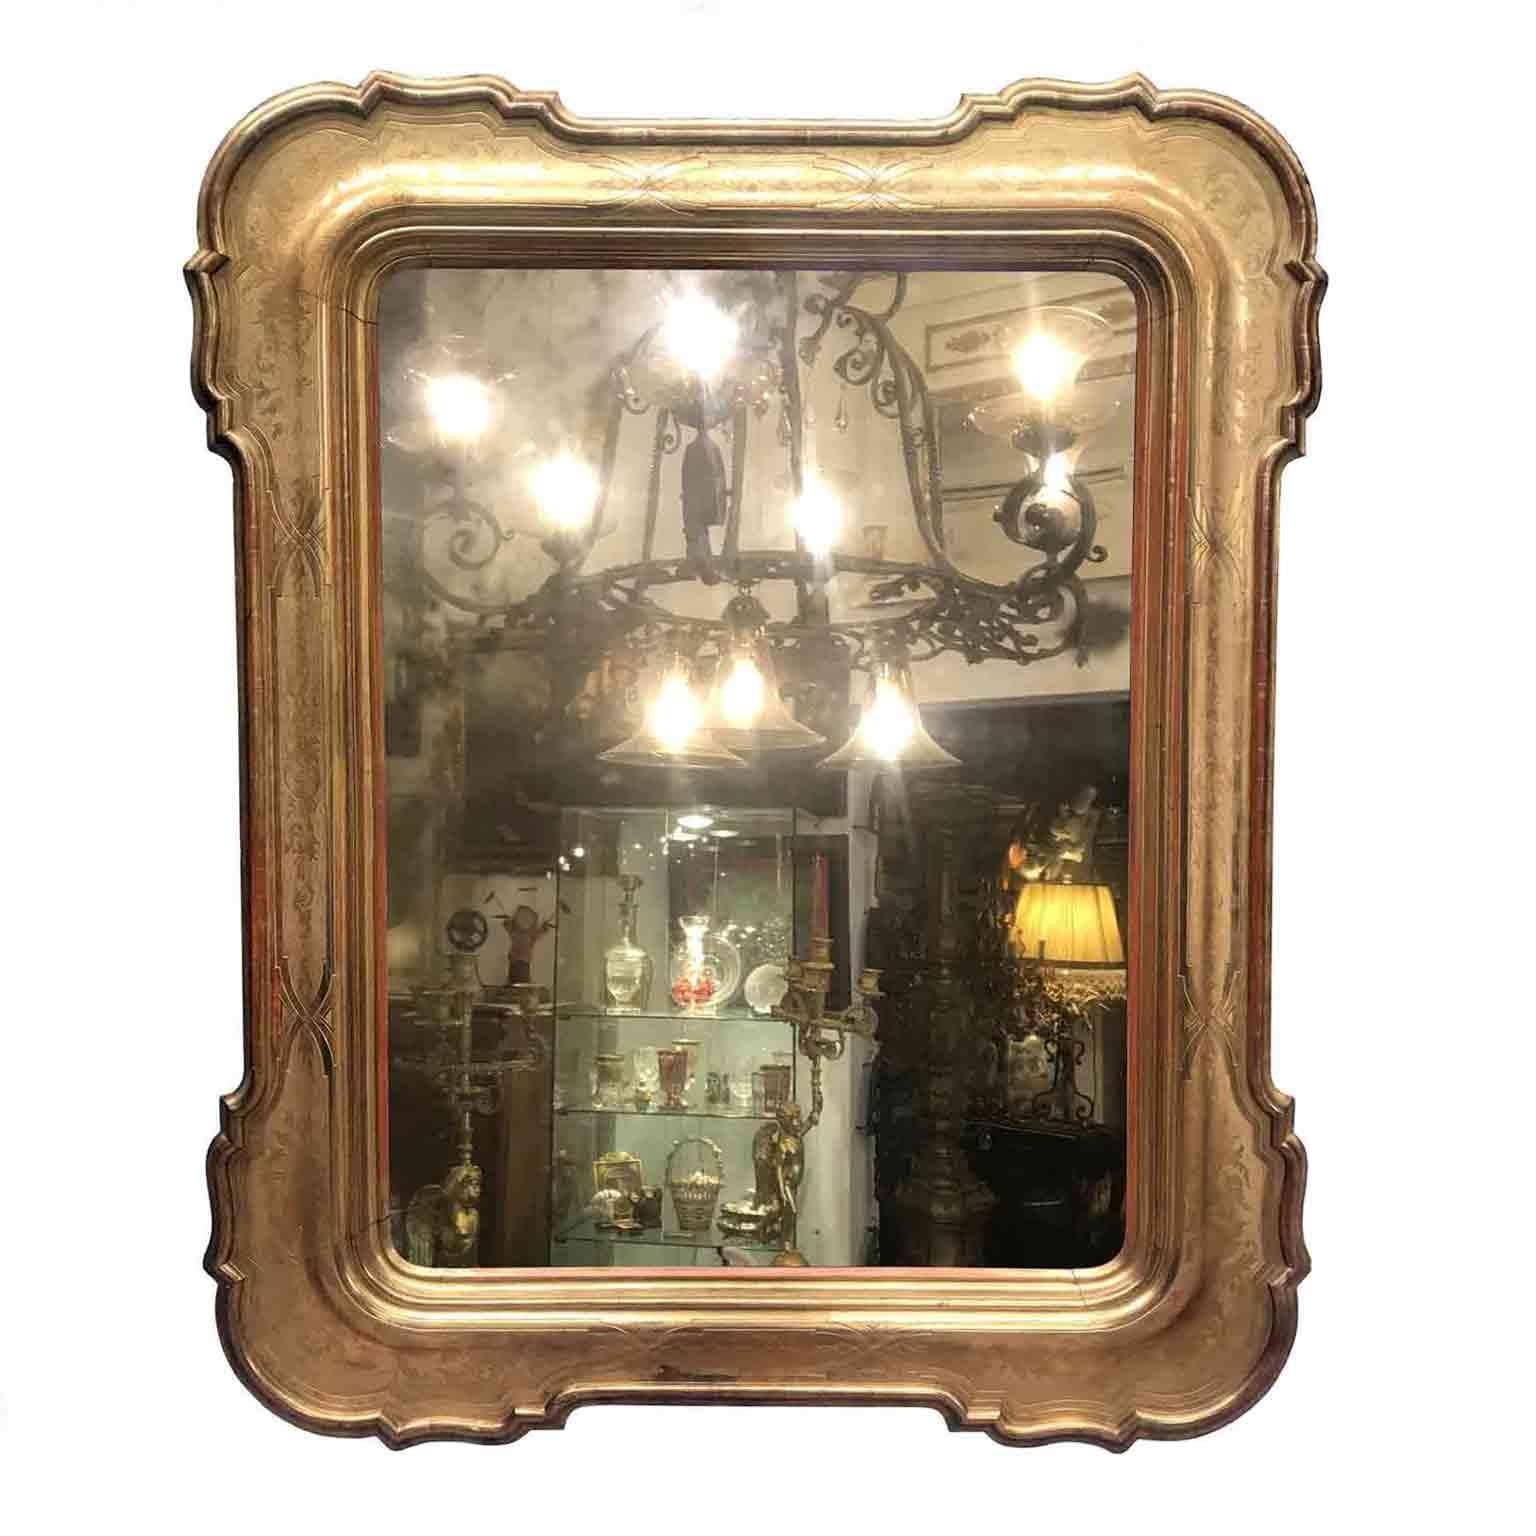 Large mid 19th century carved and golden leaf gilded wooden mirror with antique original dark mercury glass, in a whole plate.
This shaped Louis Philippe Italian frame is finely carved with bulino and punched ground, finely decorated with vegetal